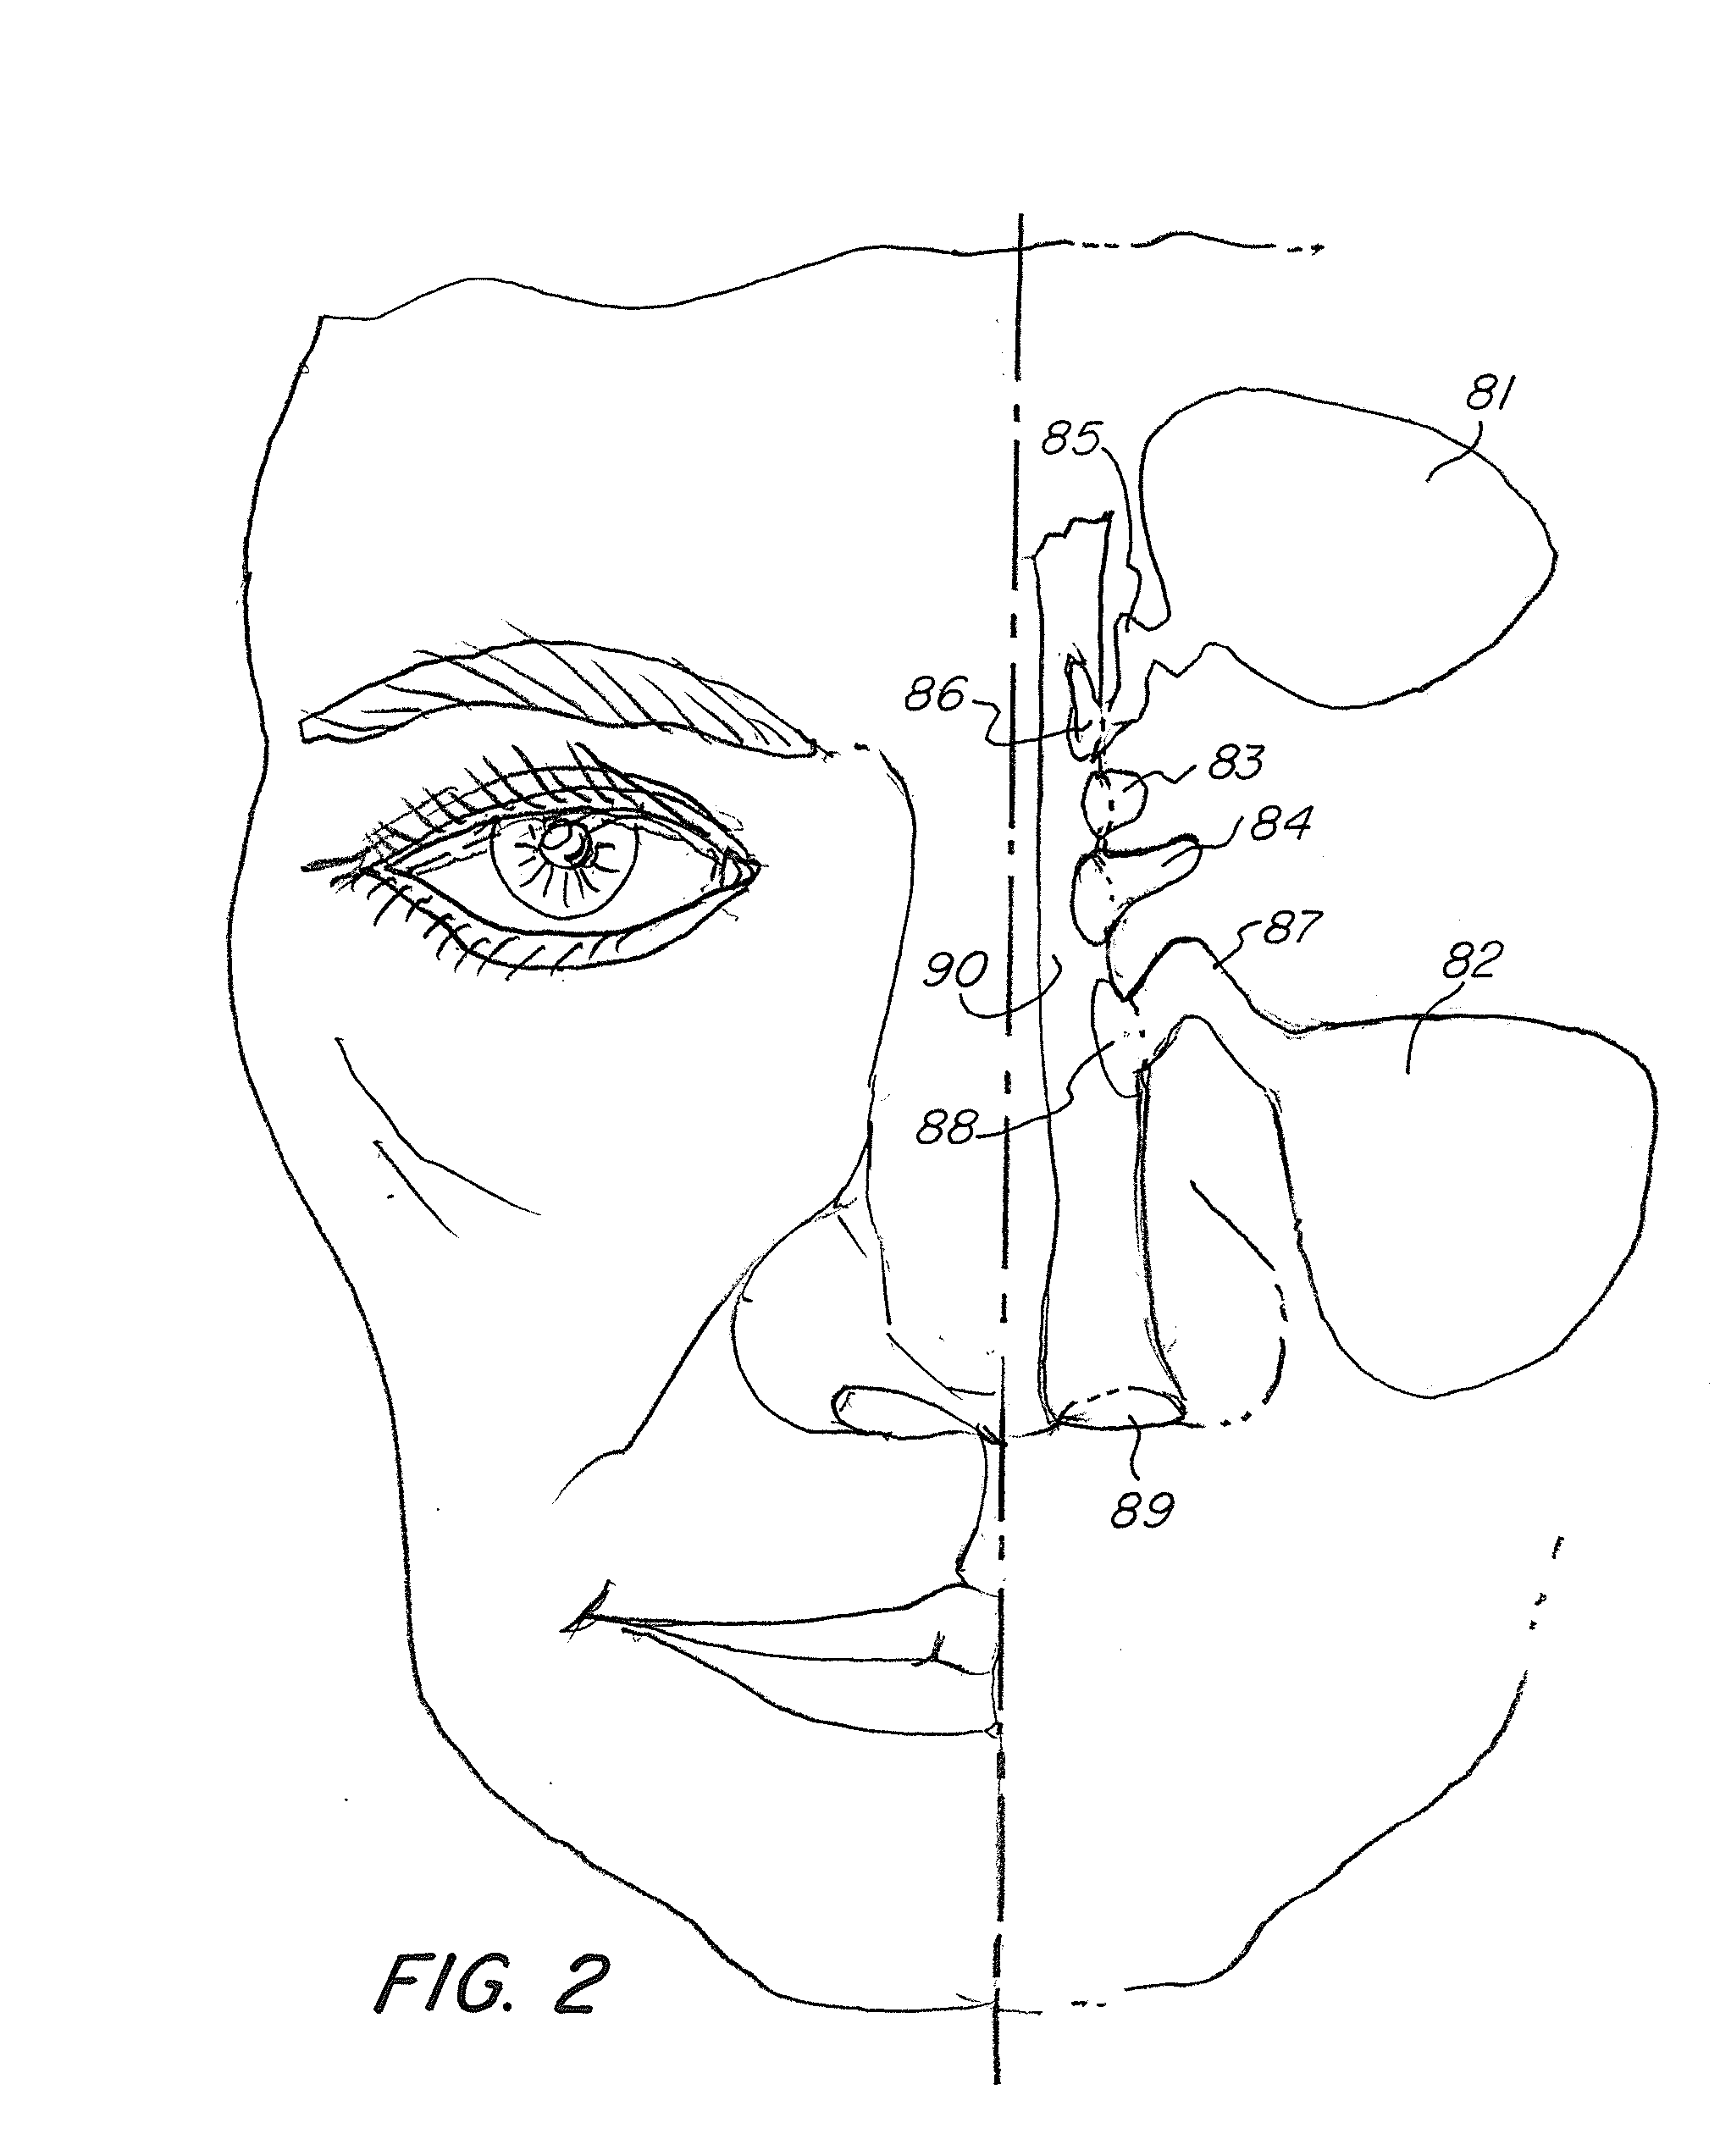 Nasal Delivery of Agents with Nested Balloon Catheter